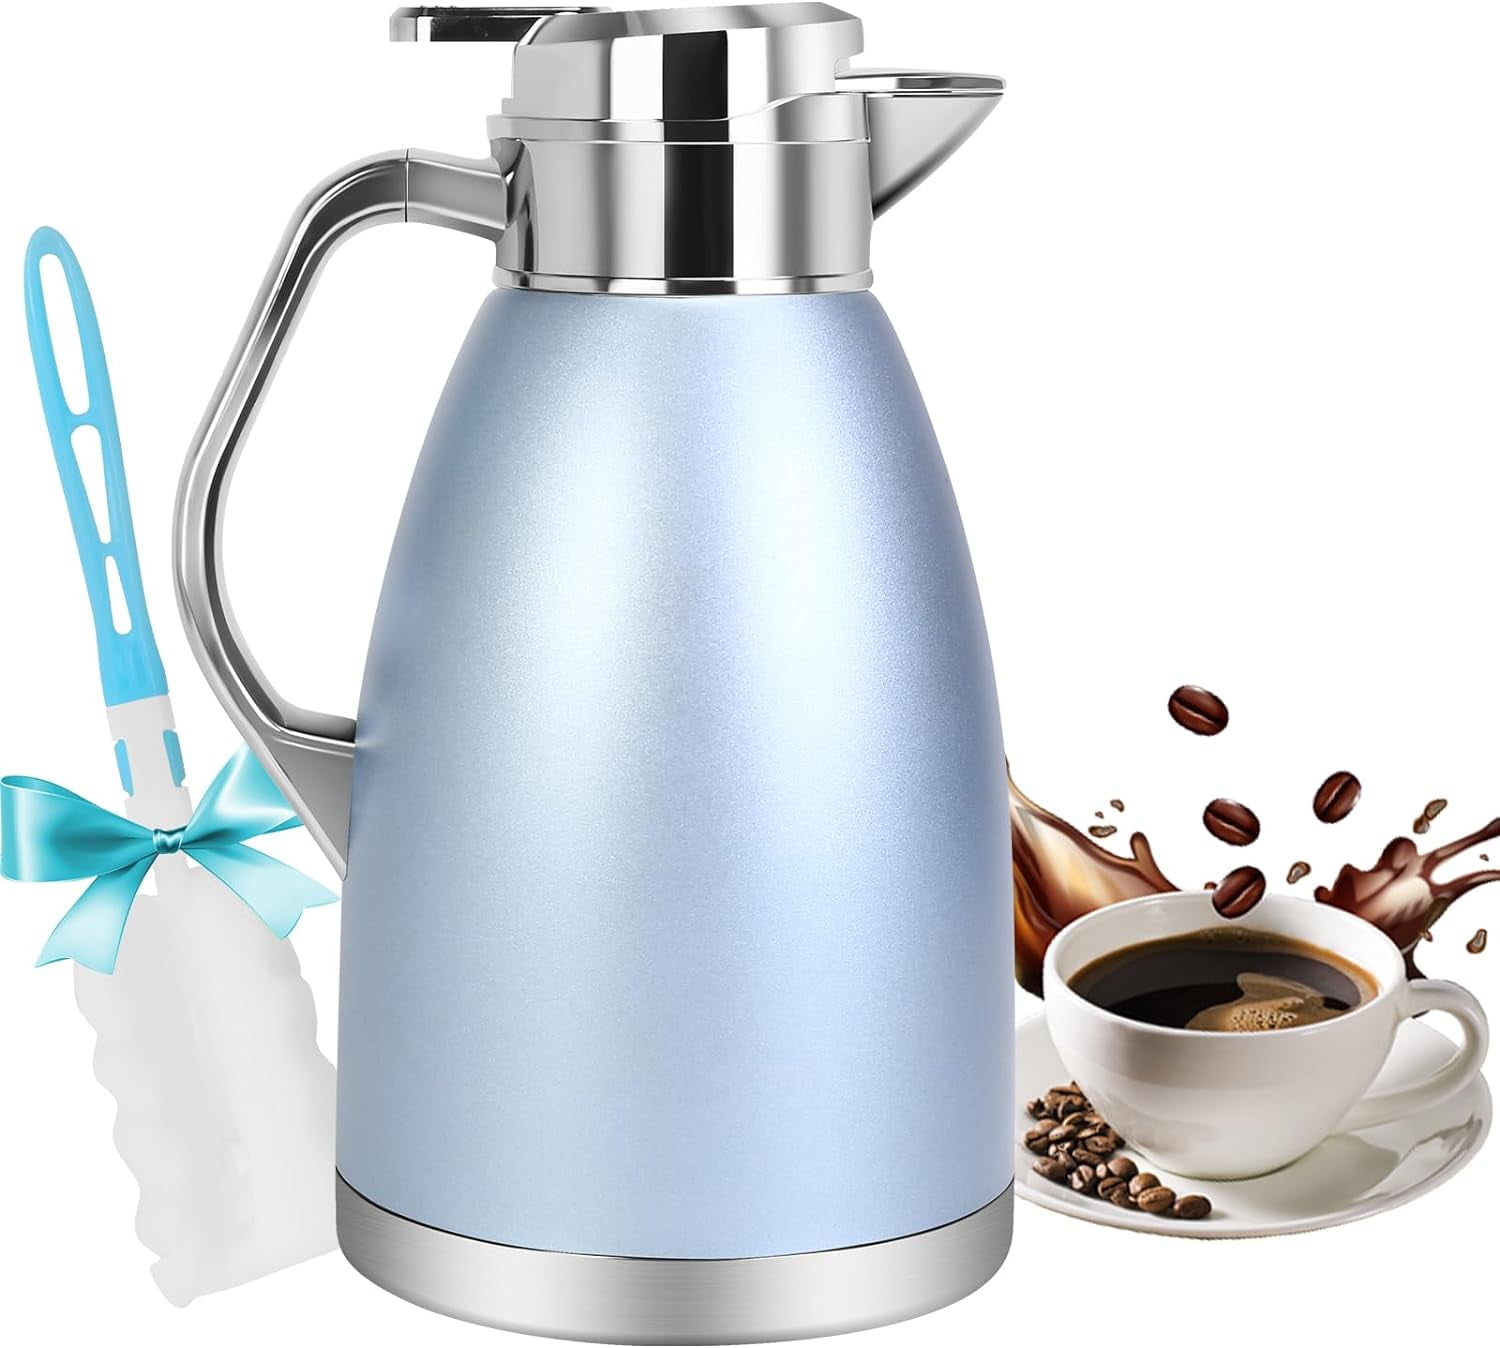 SSAWcasa 61oz Coffee Carafe for Keeping Hot,Stainless Steel